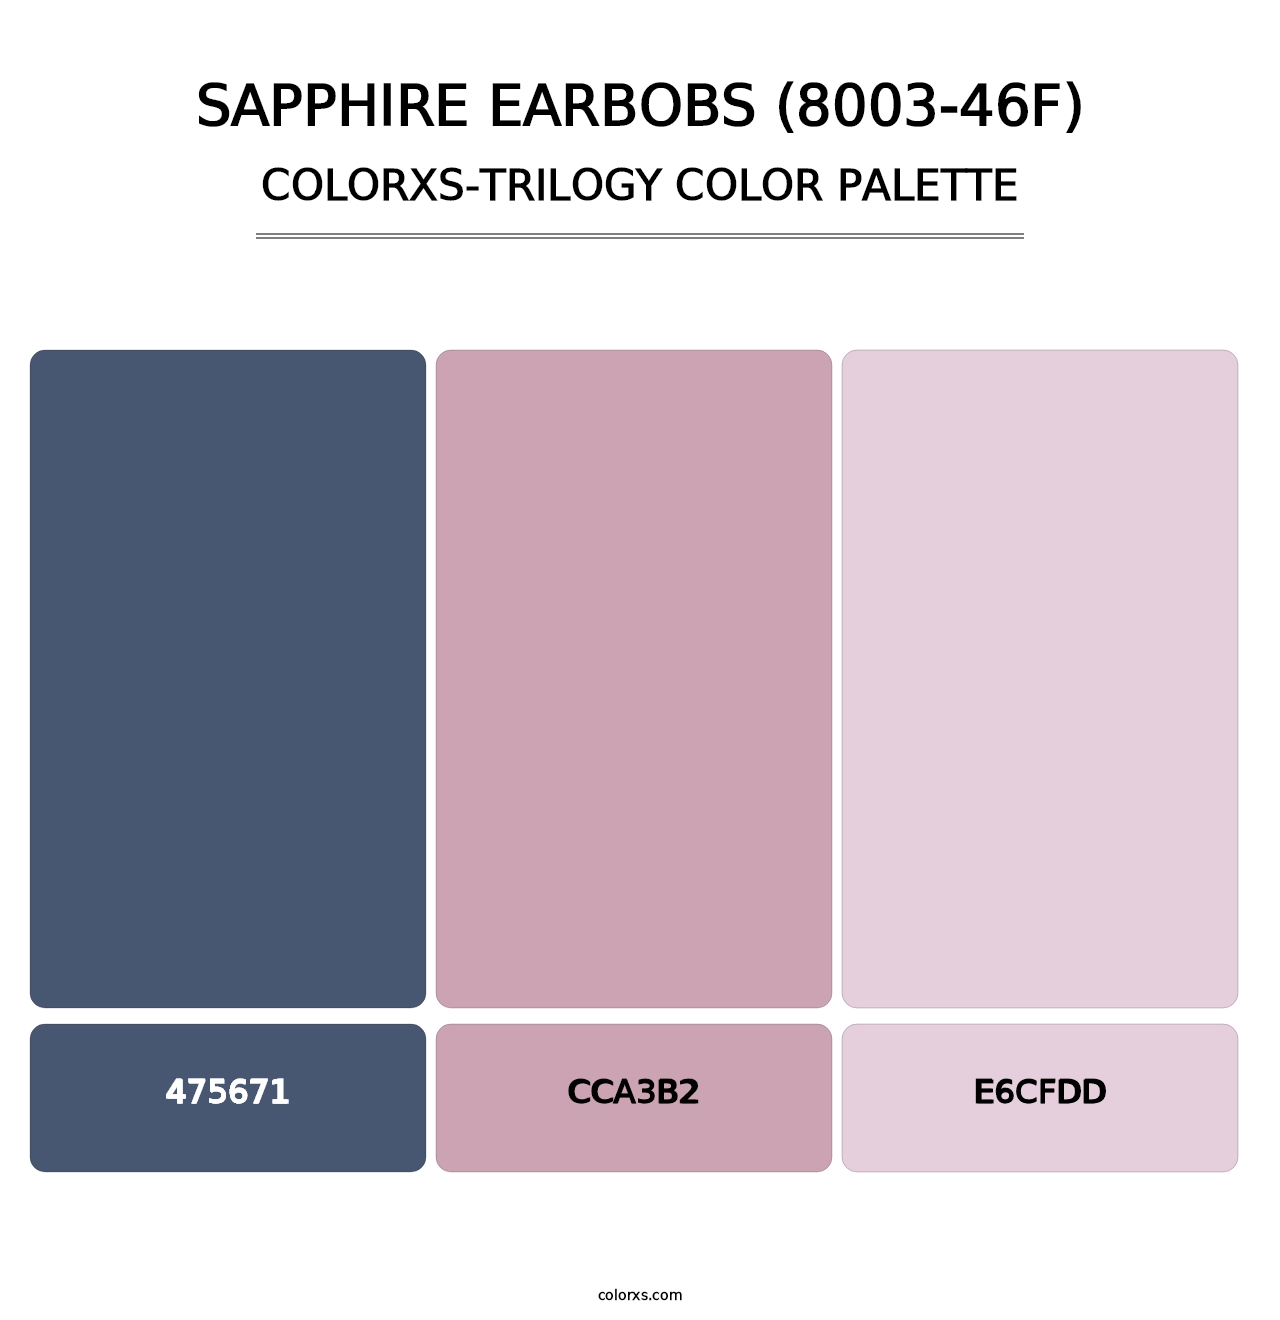 Sapphire Earbobs (8003-46F) - Colorxs Trilogy Palette